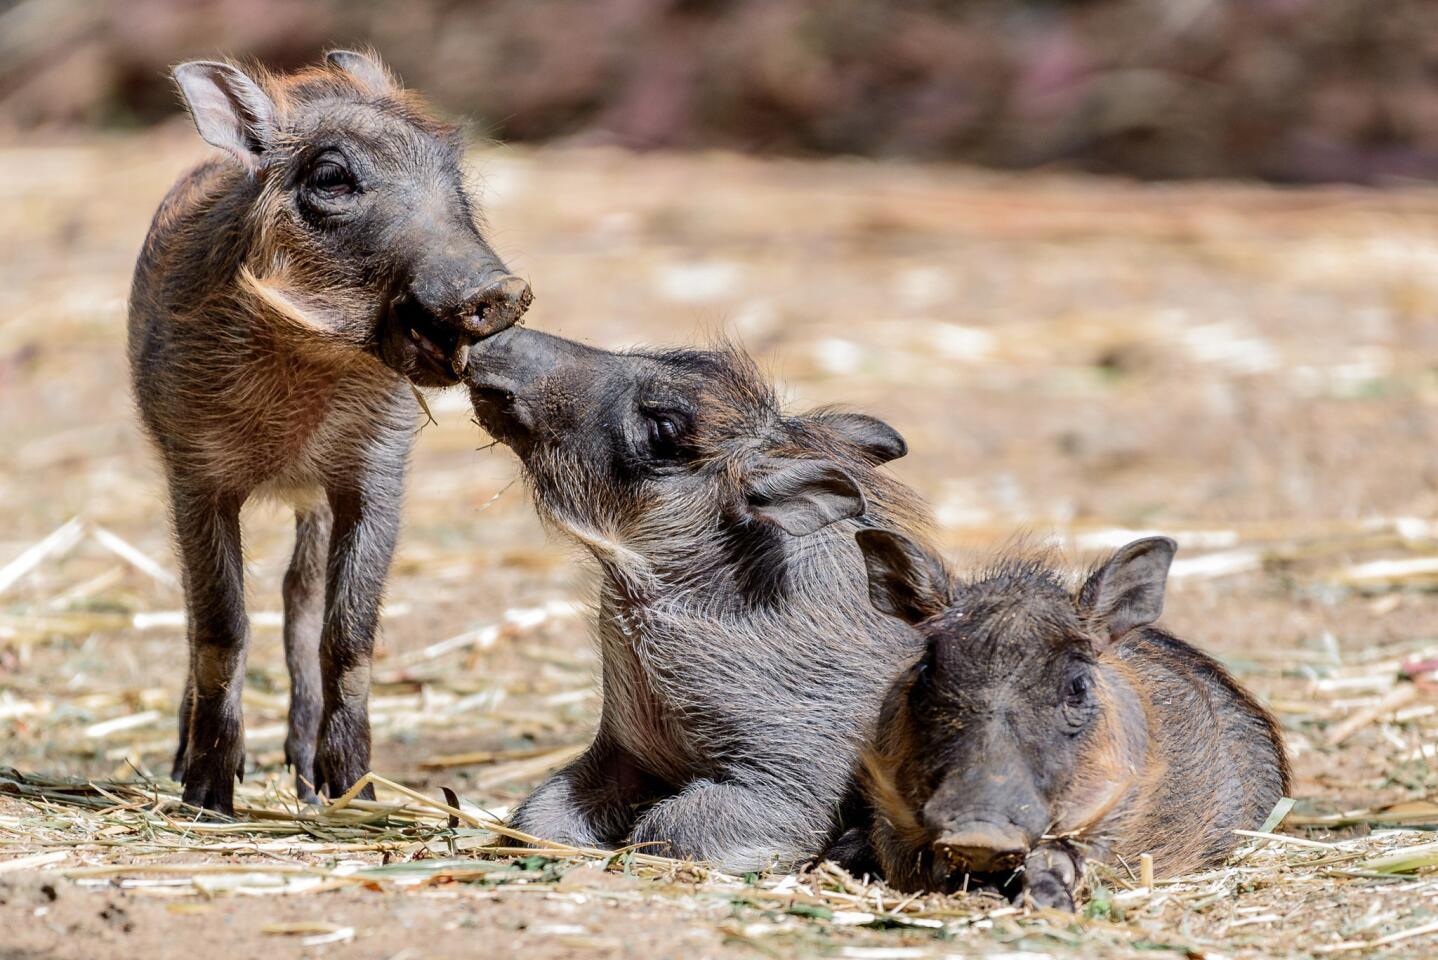 Newly born baby warthogs appear at the Oakland Zoo in Oakland, Calif., on June 6, 2016.